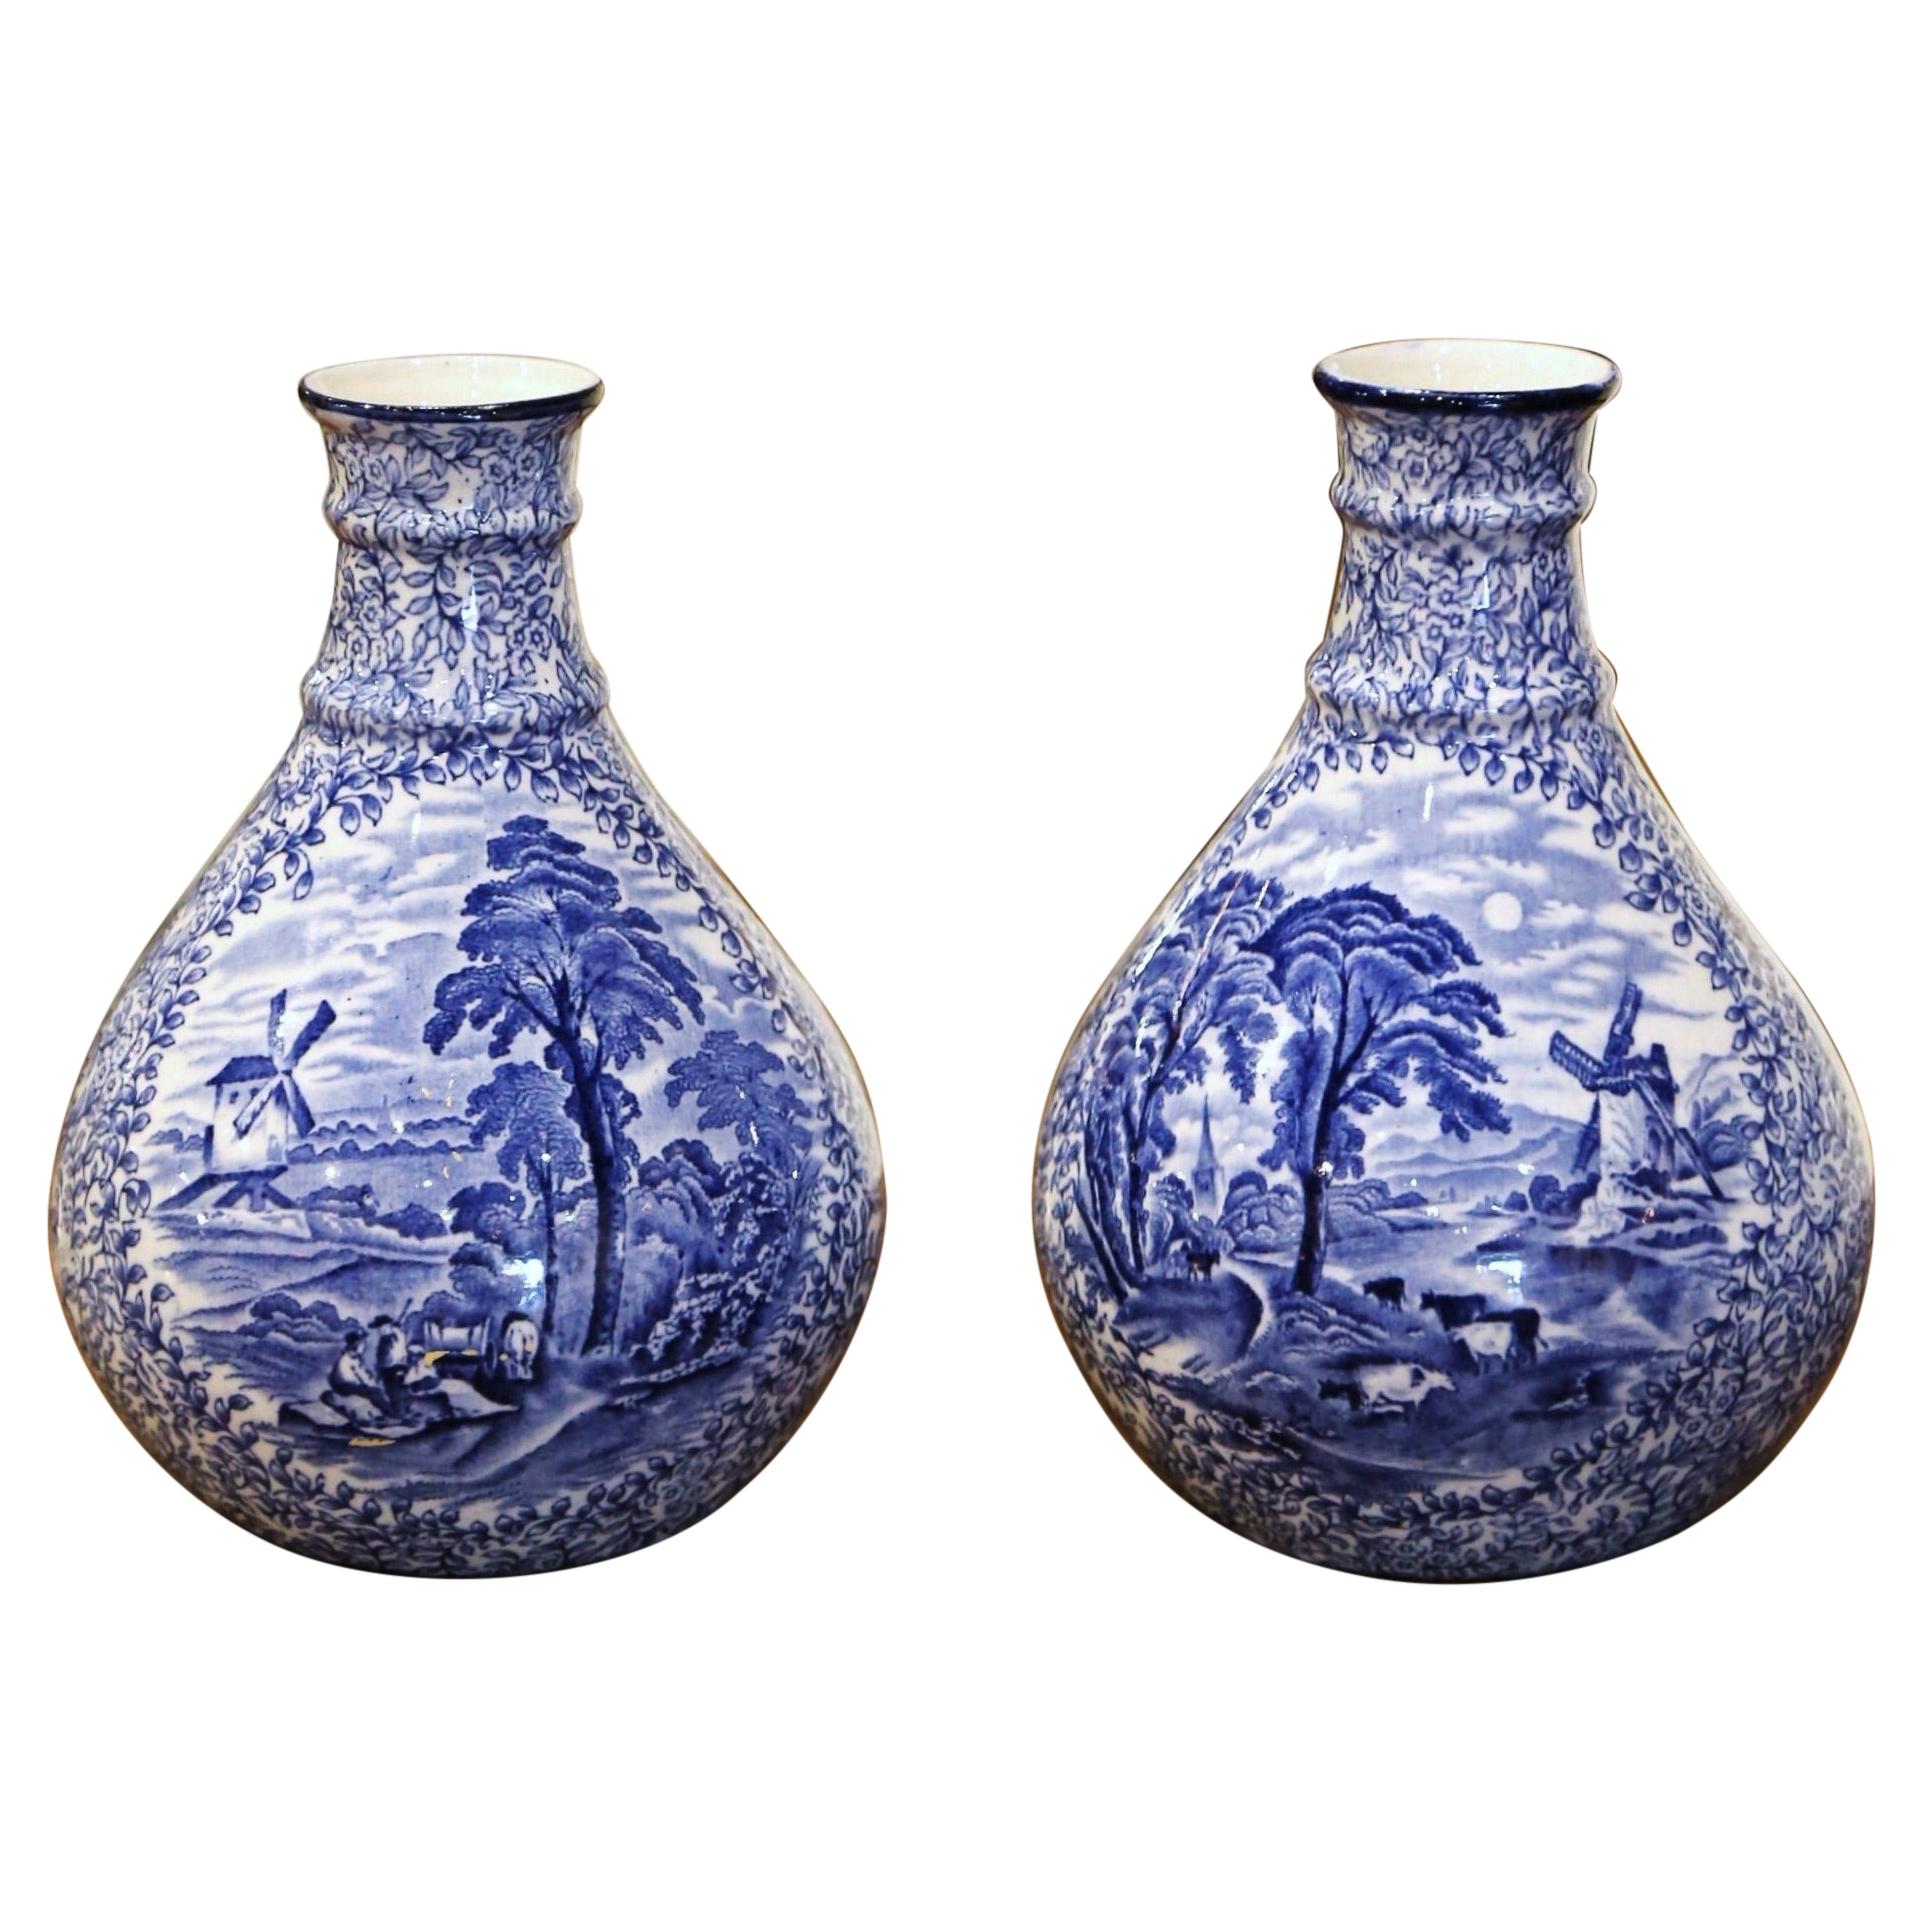 Pair of Early 20th Century English Blue and White Painted Faience Delft Vases